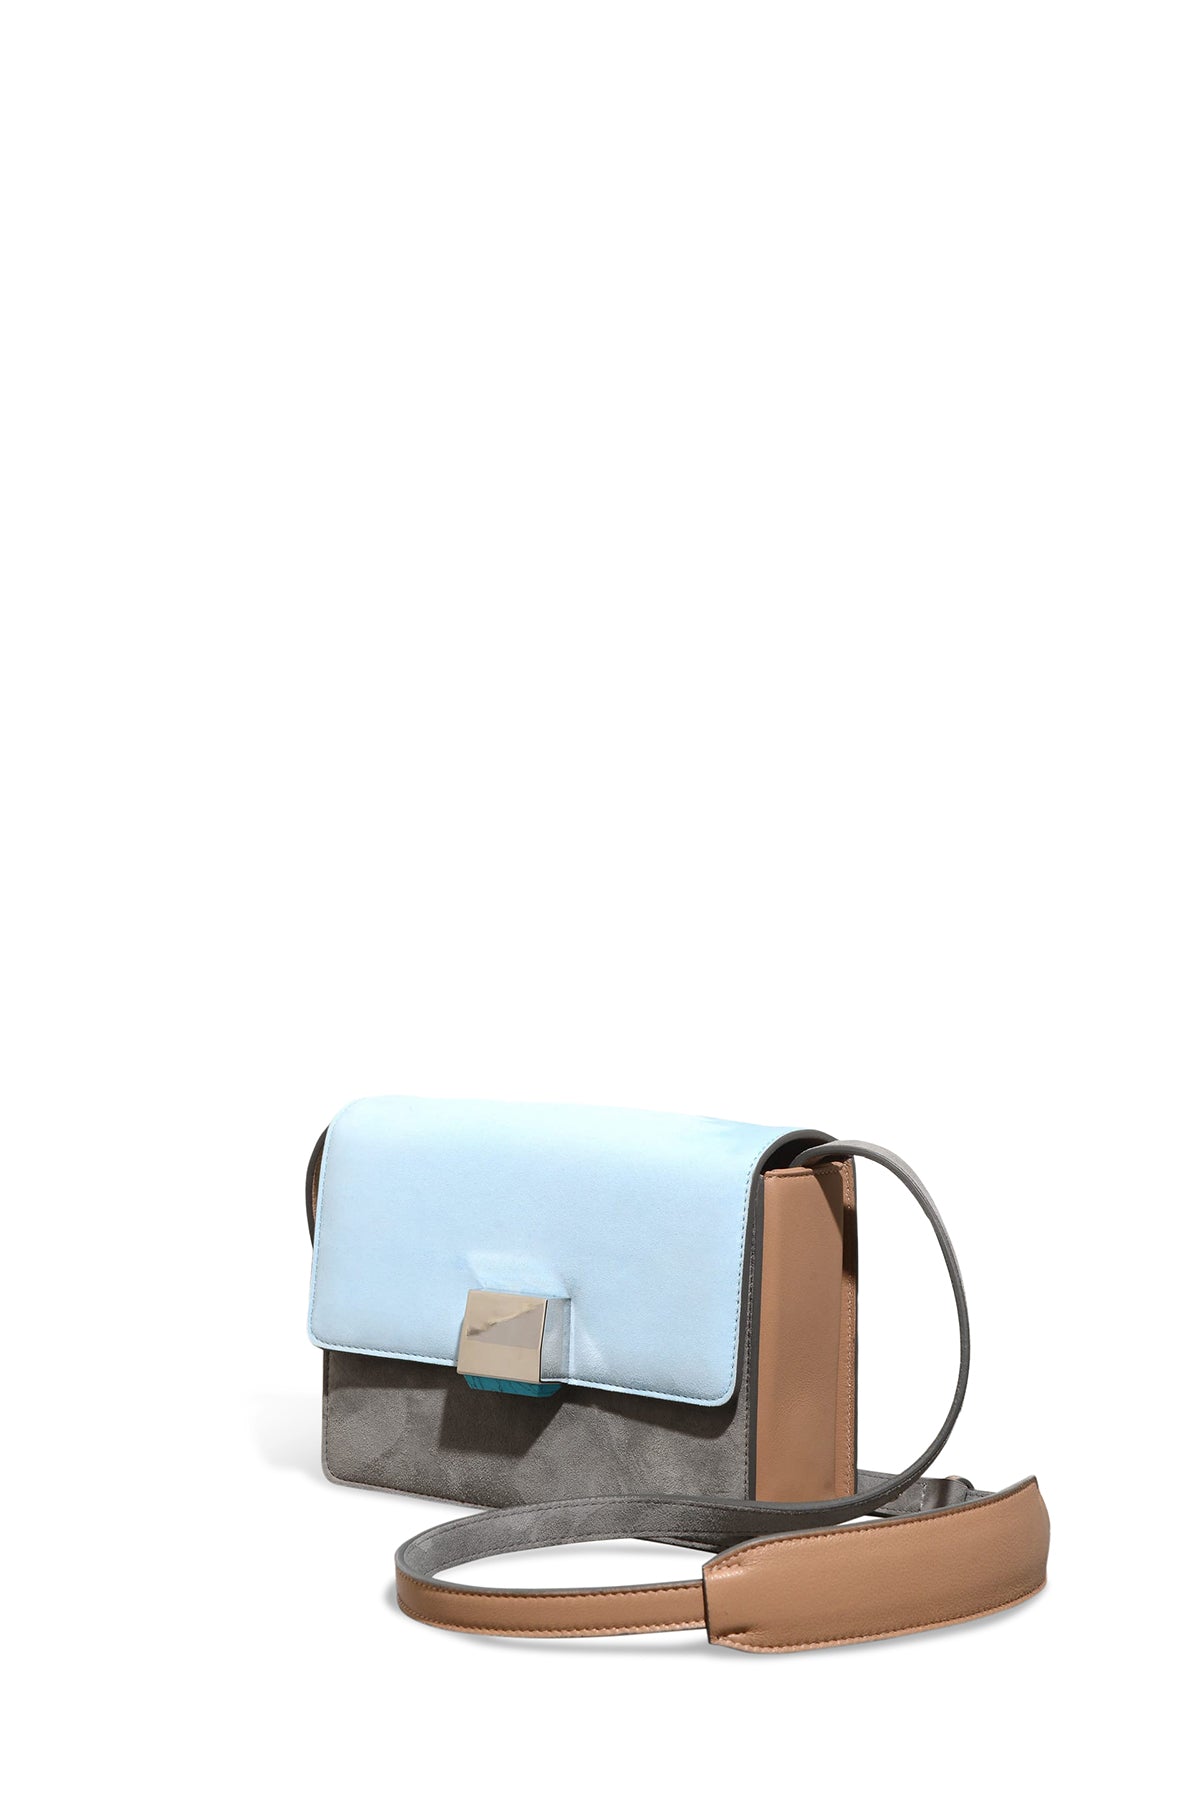 Mercedes Bag in Grey & Light Blue Suede with Nude Nappa Leather